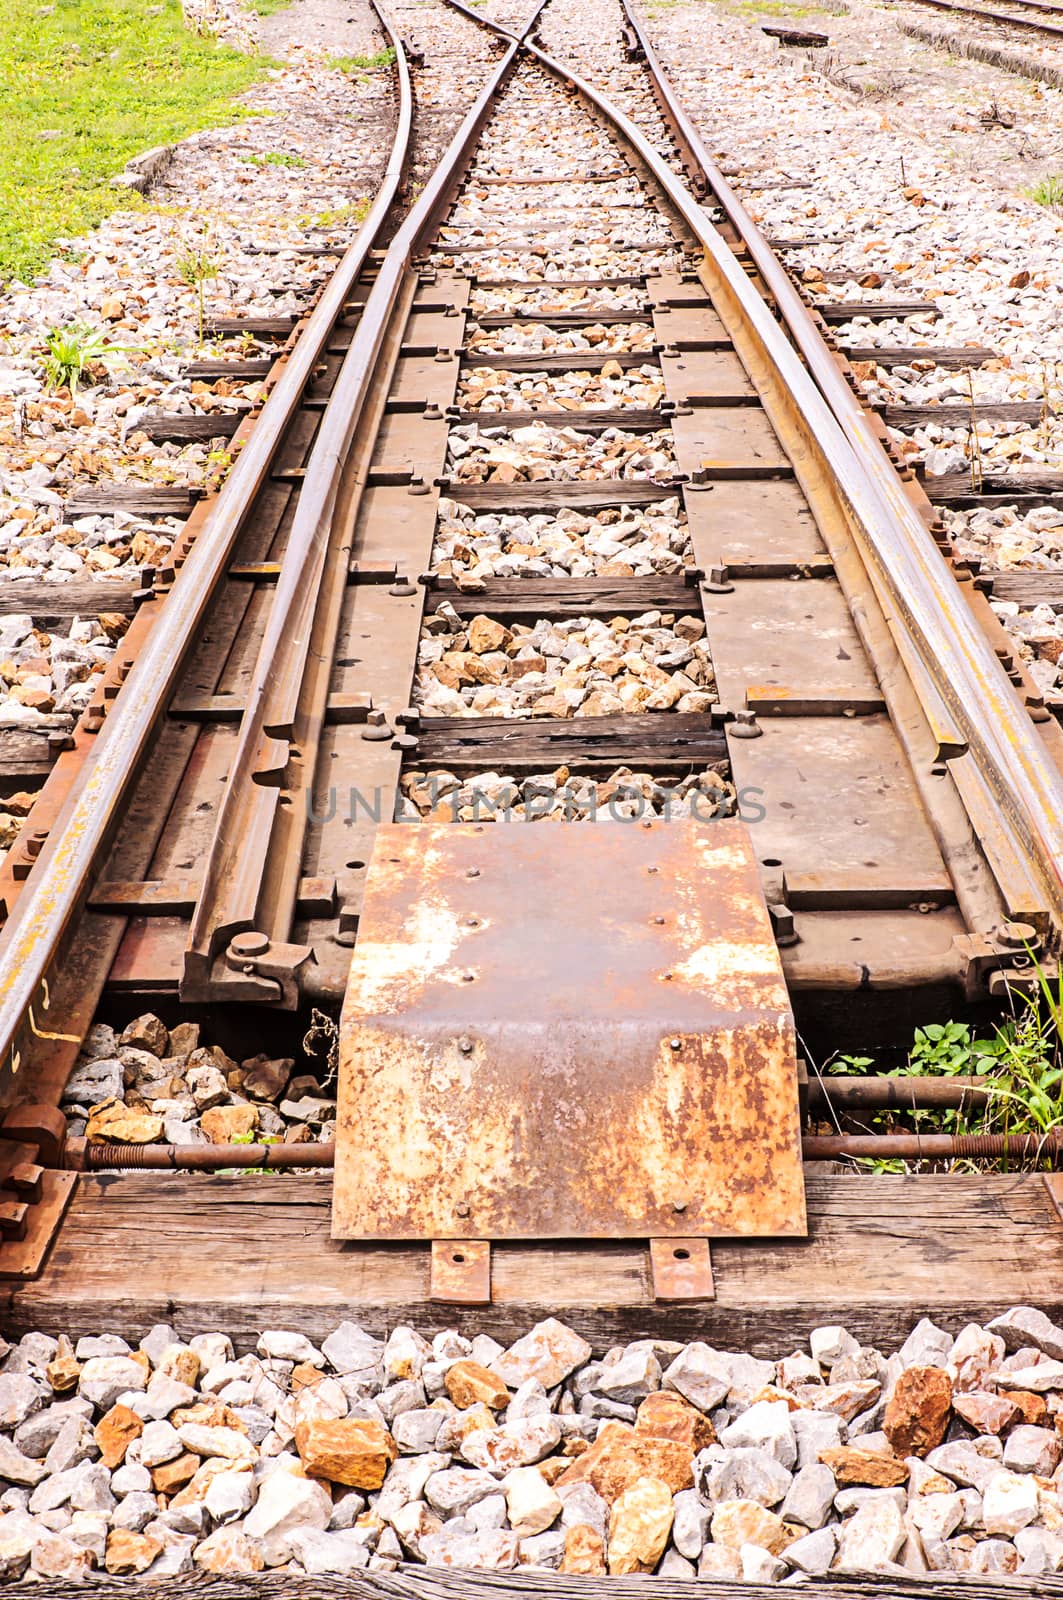 Junction railway tracks on sleepers with  switch 